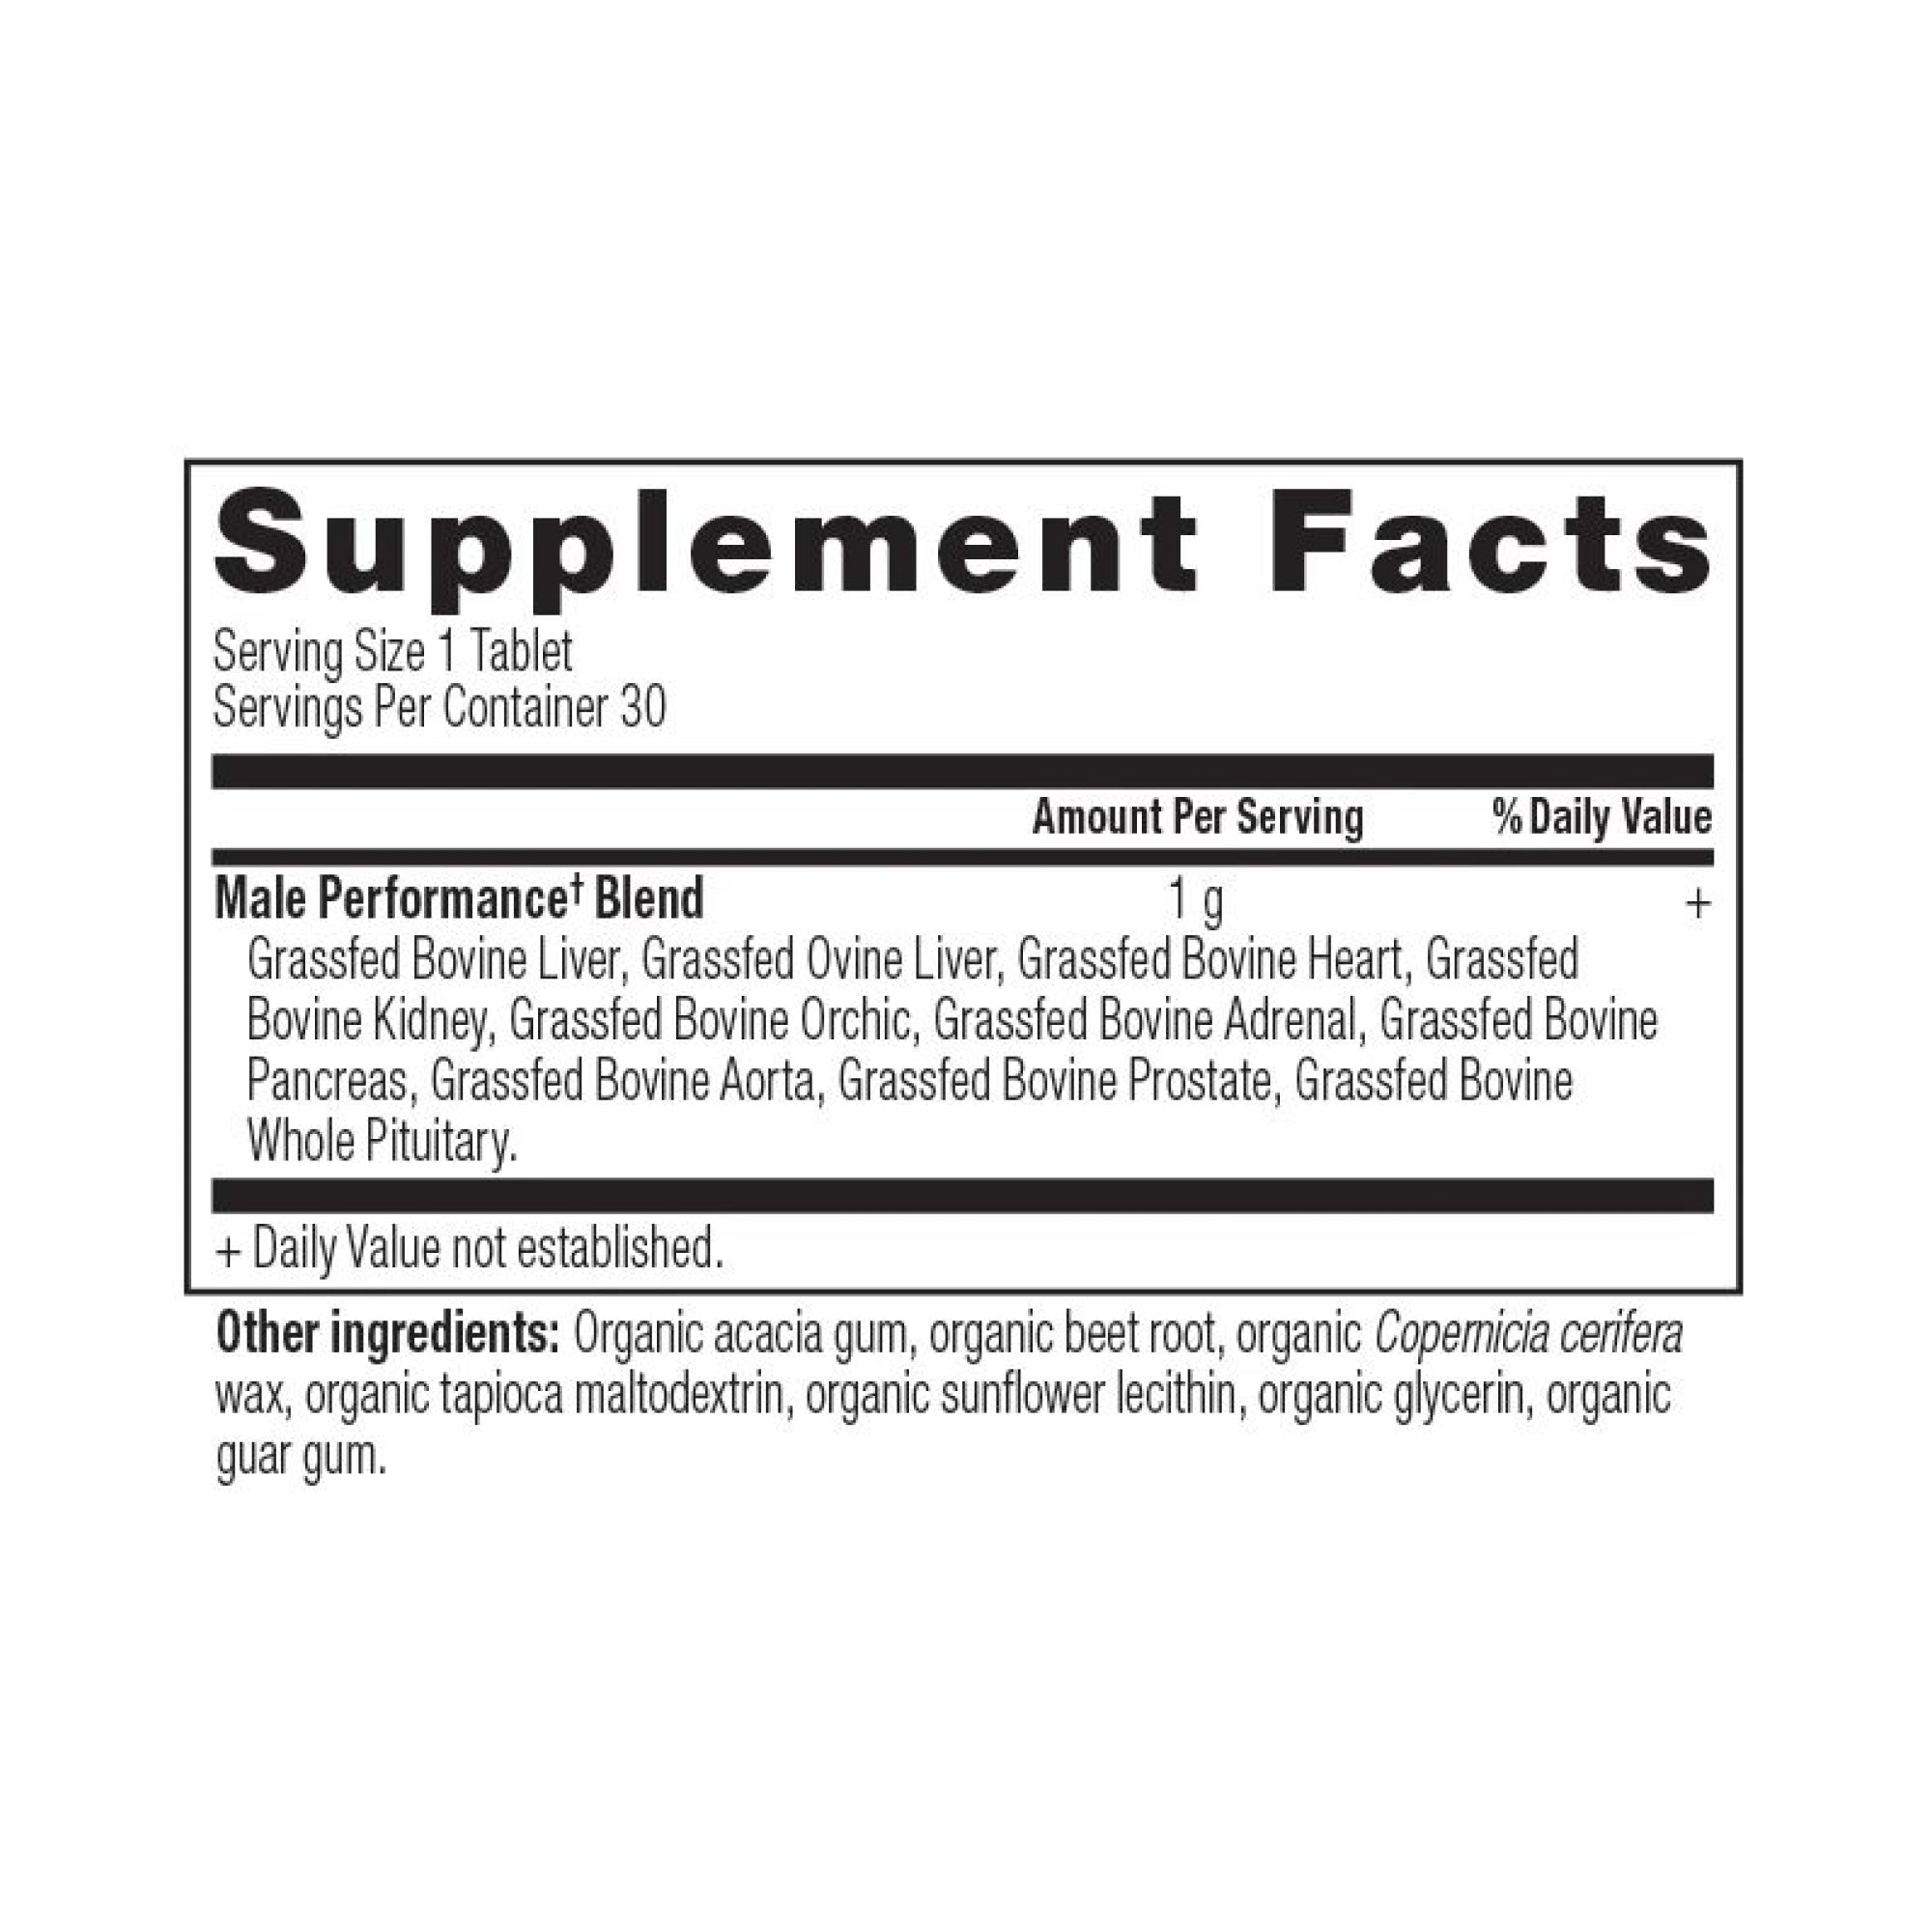 Male Performance Once Daily Tablets supplement label